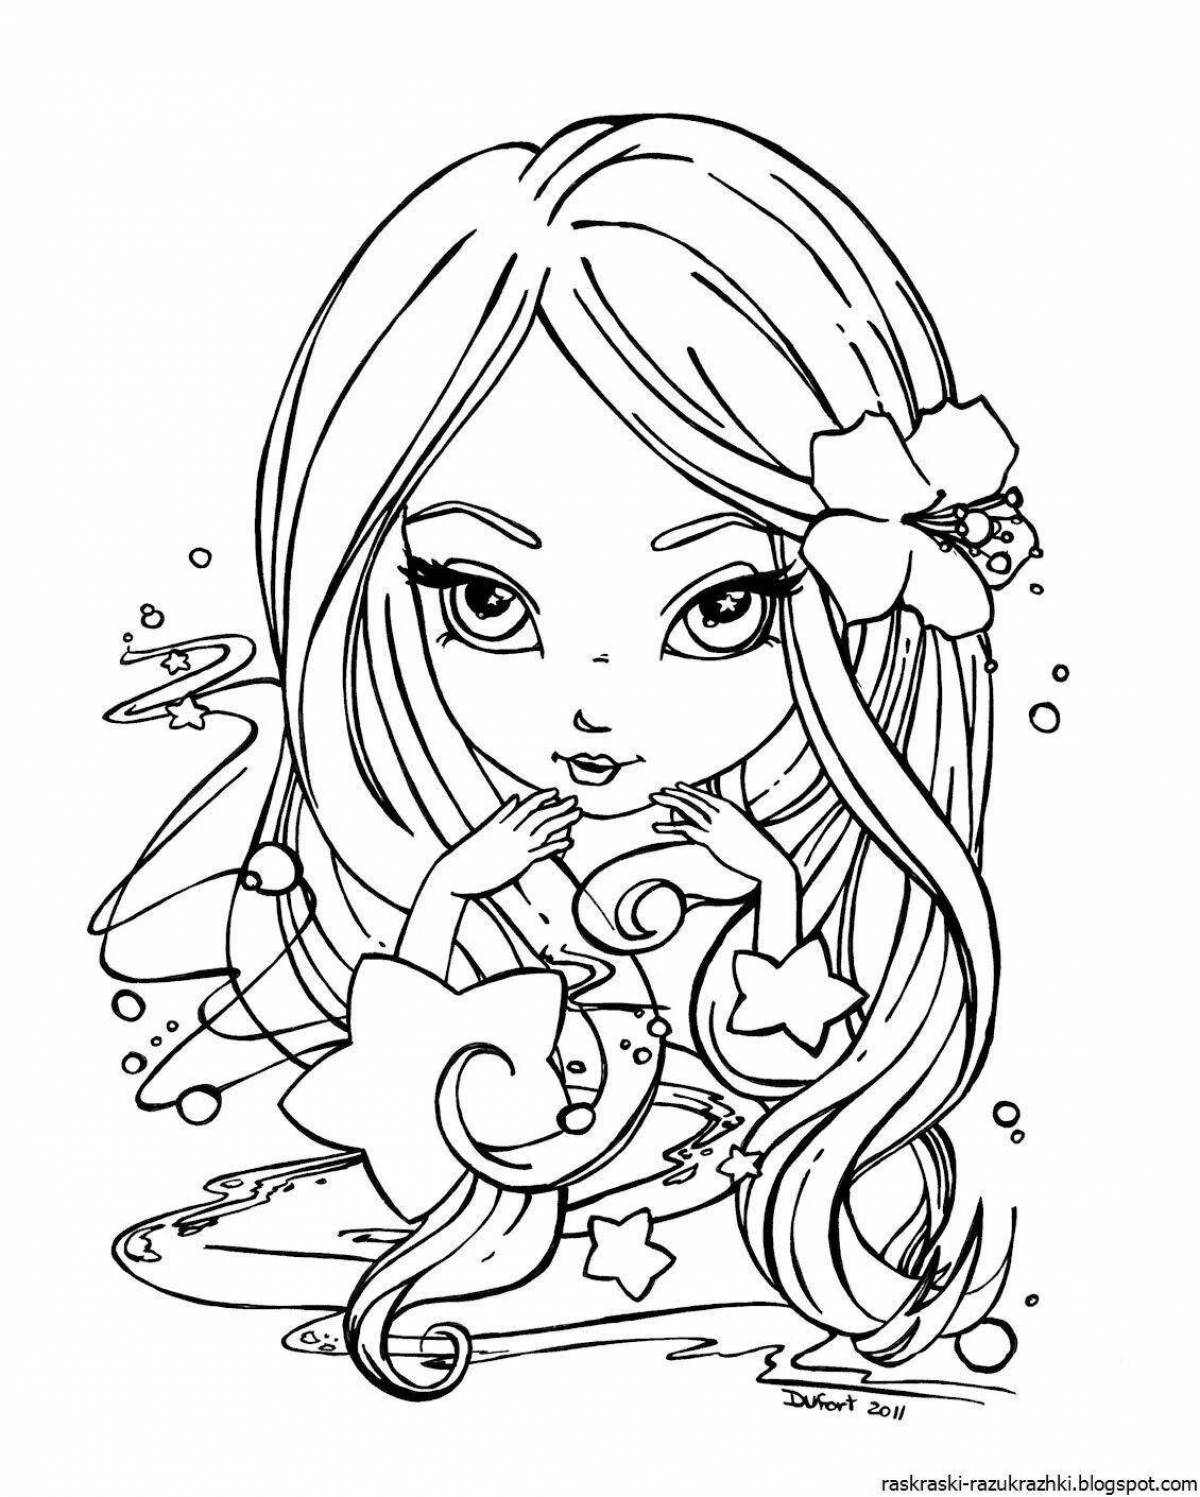 Wonderland multicolored coloring page for 13 year olds